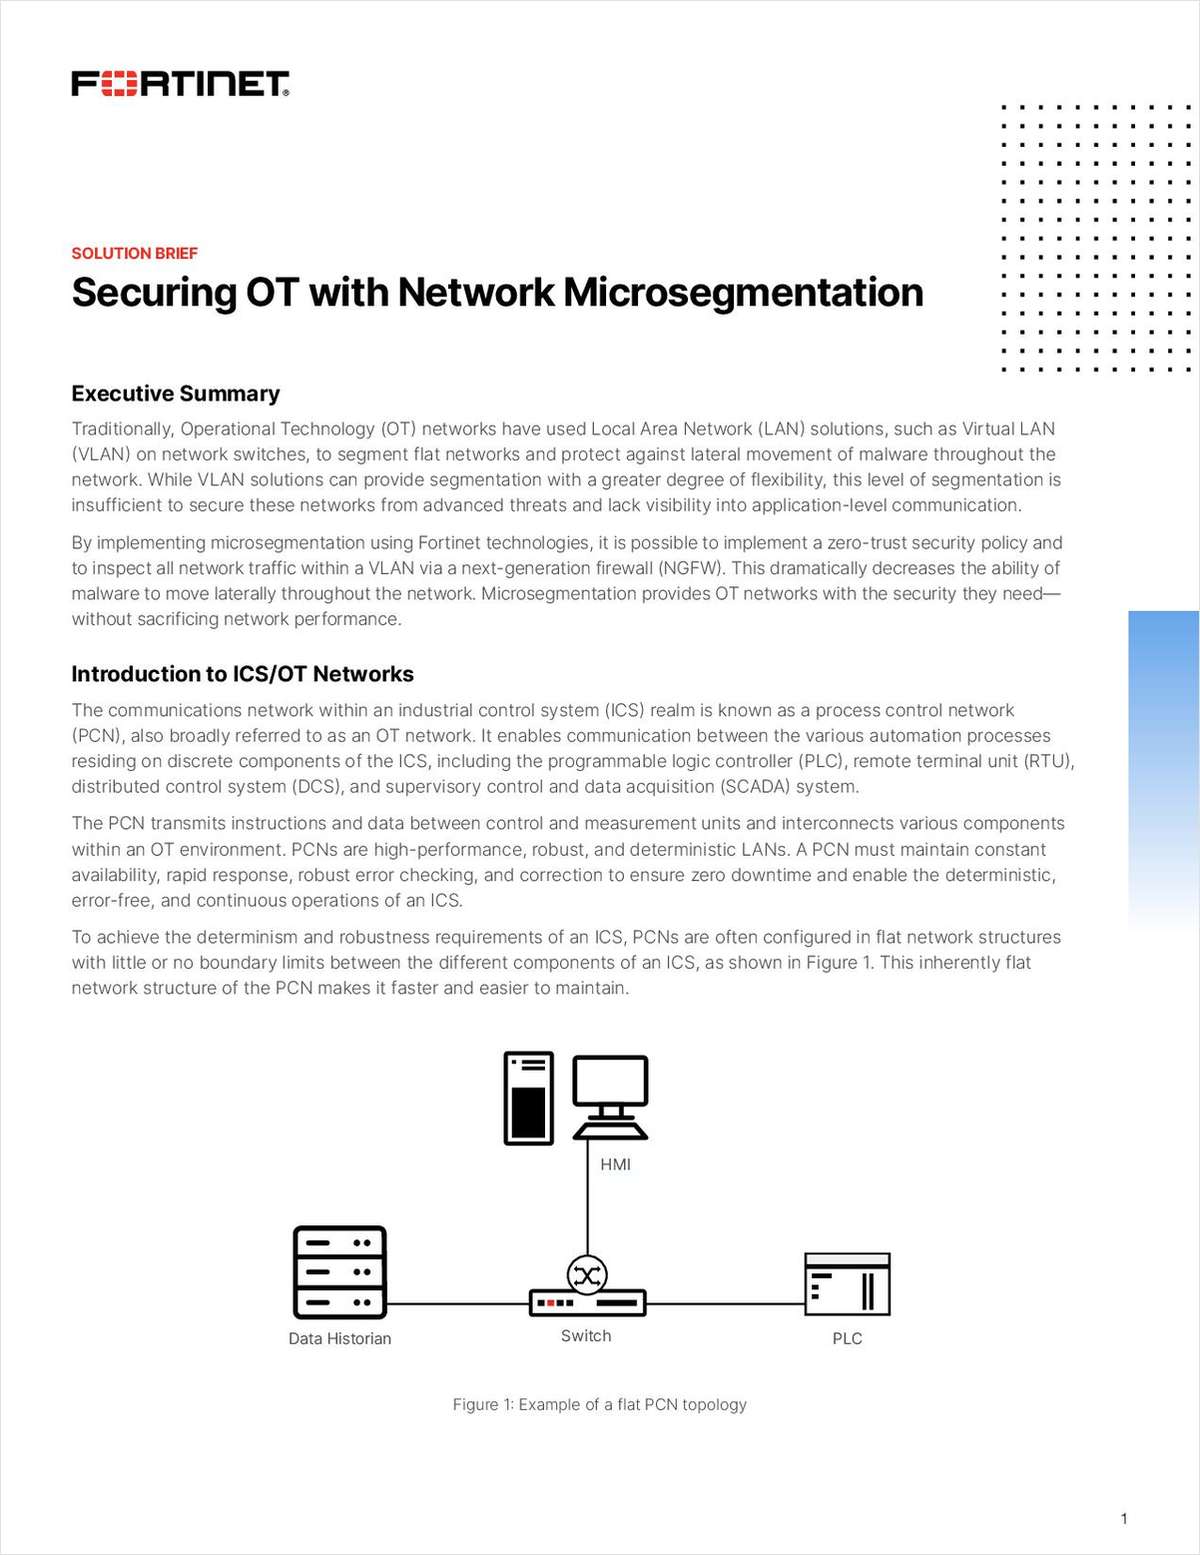 Securing OT with Network Microsegmentation